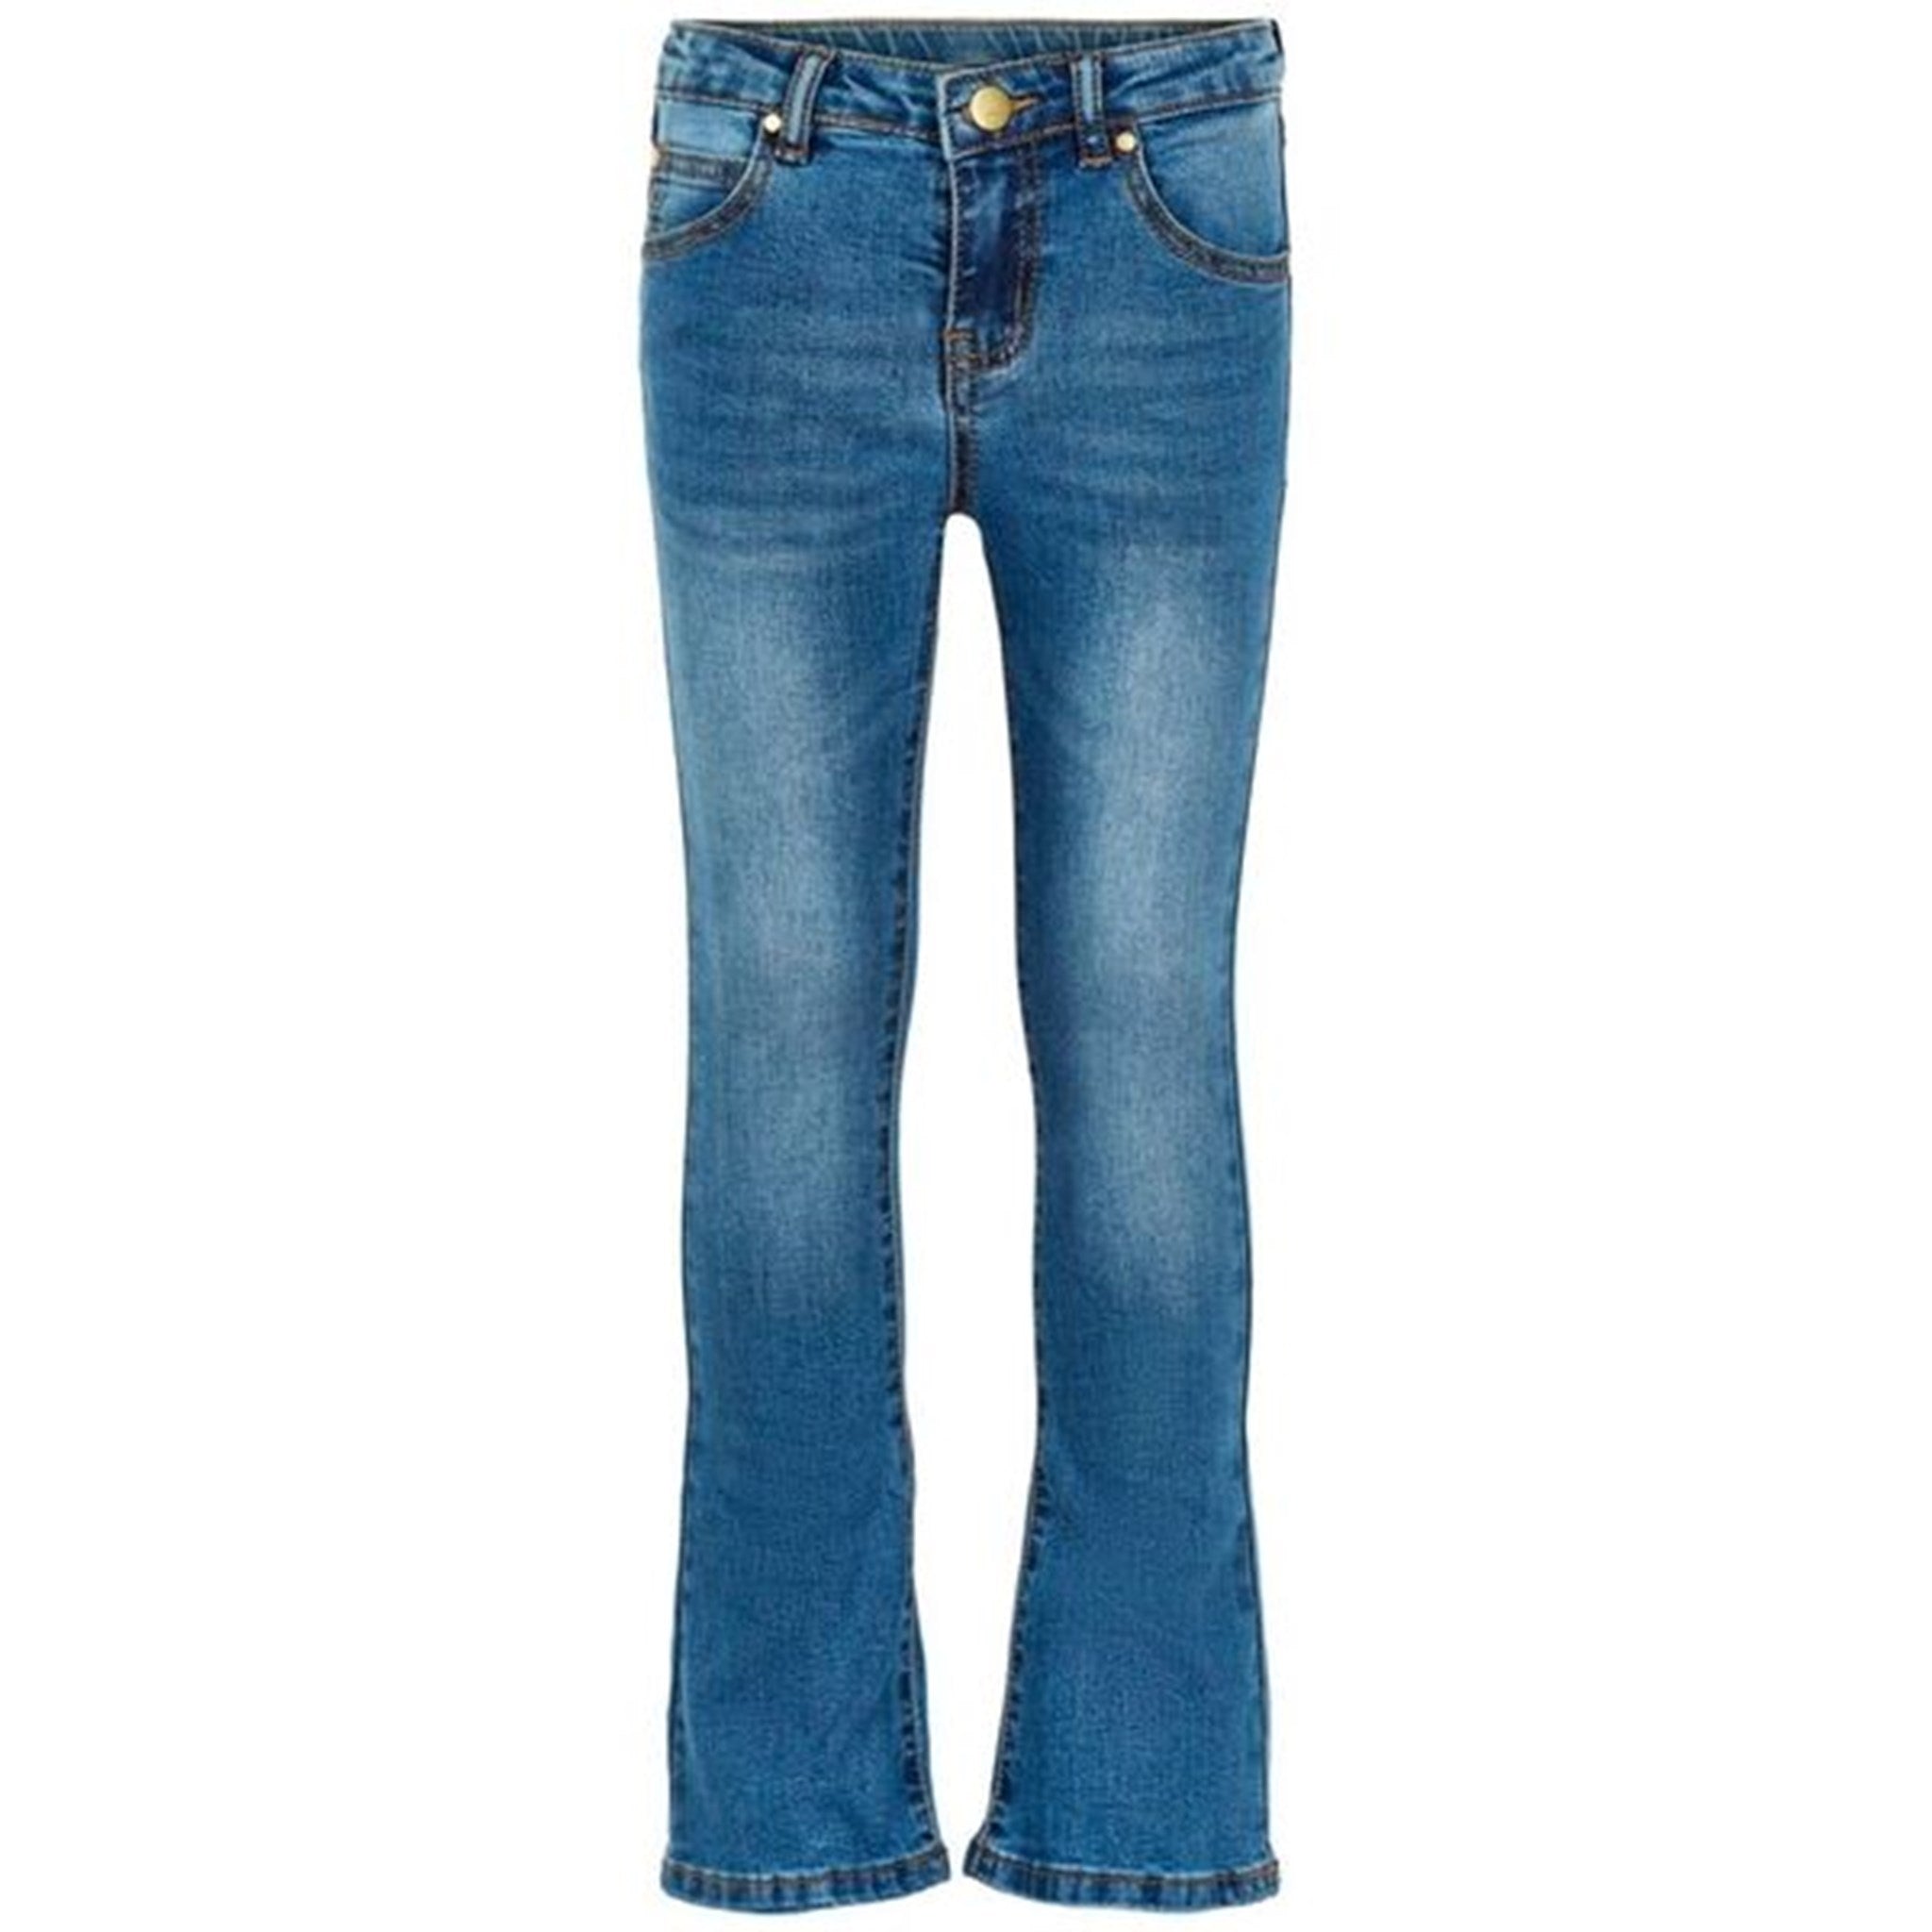 The New Flared Jeans Unwashed Denim